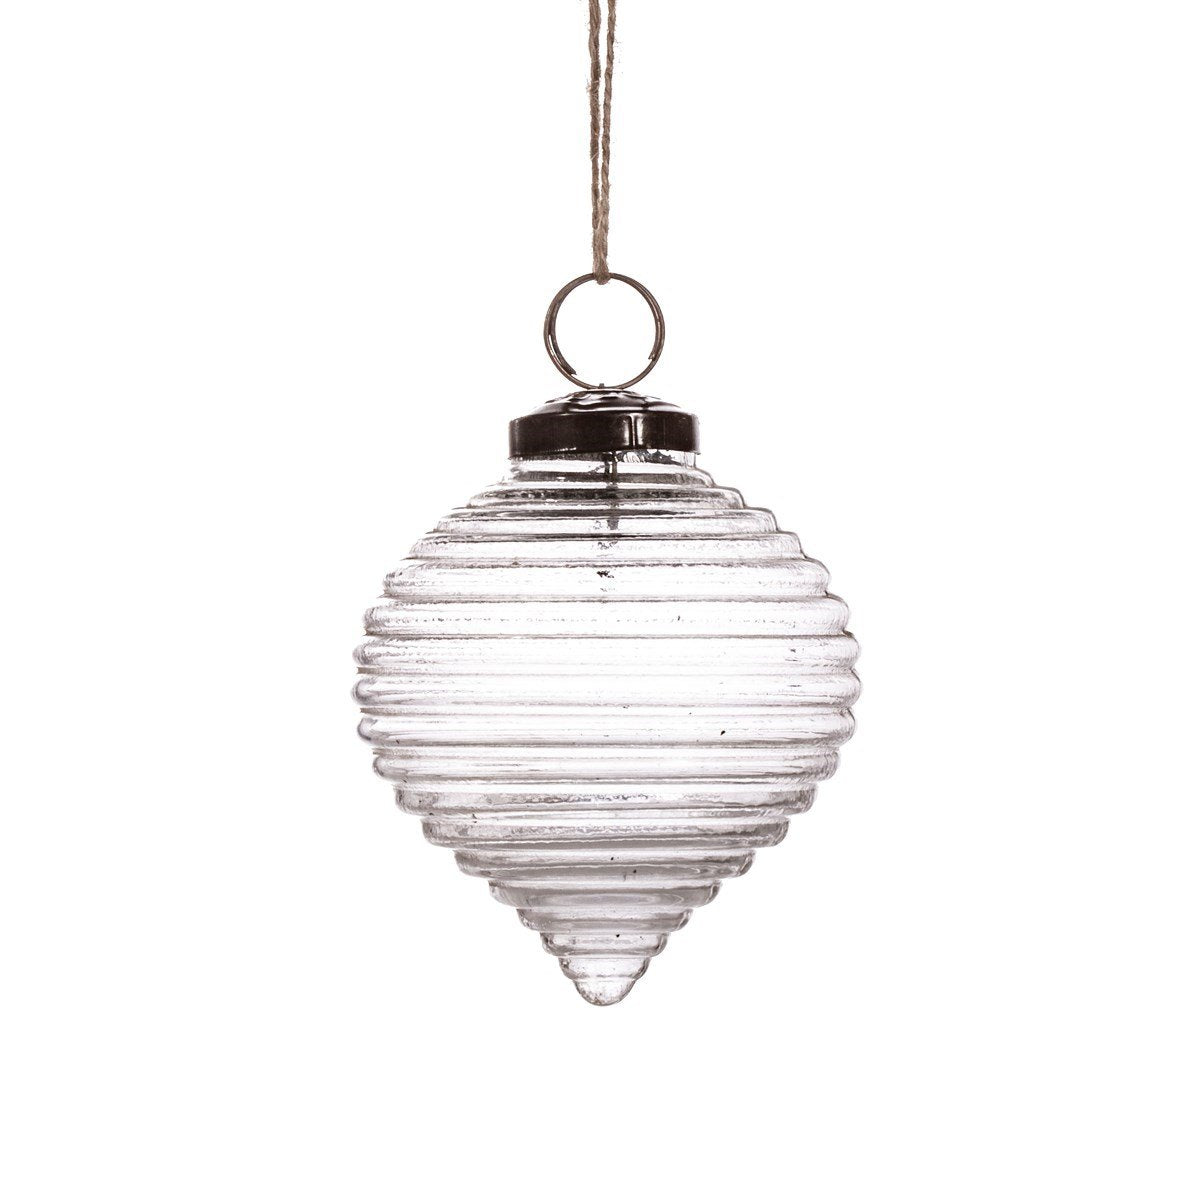 View Clear Recycled Glass Rippled Bauble information